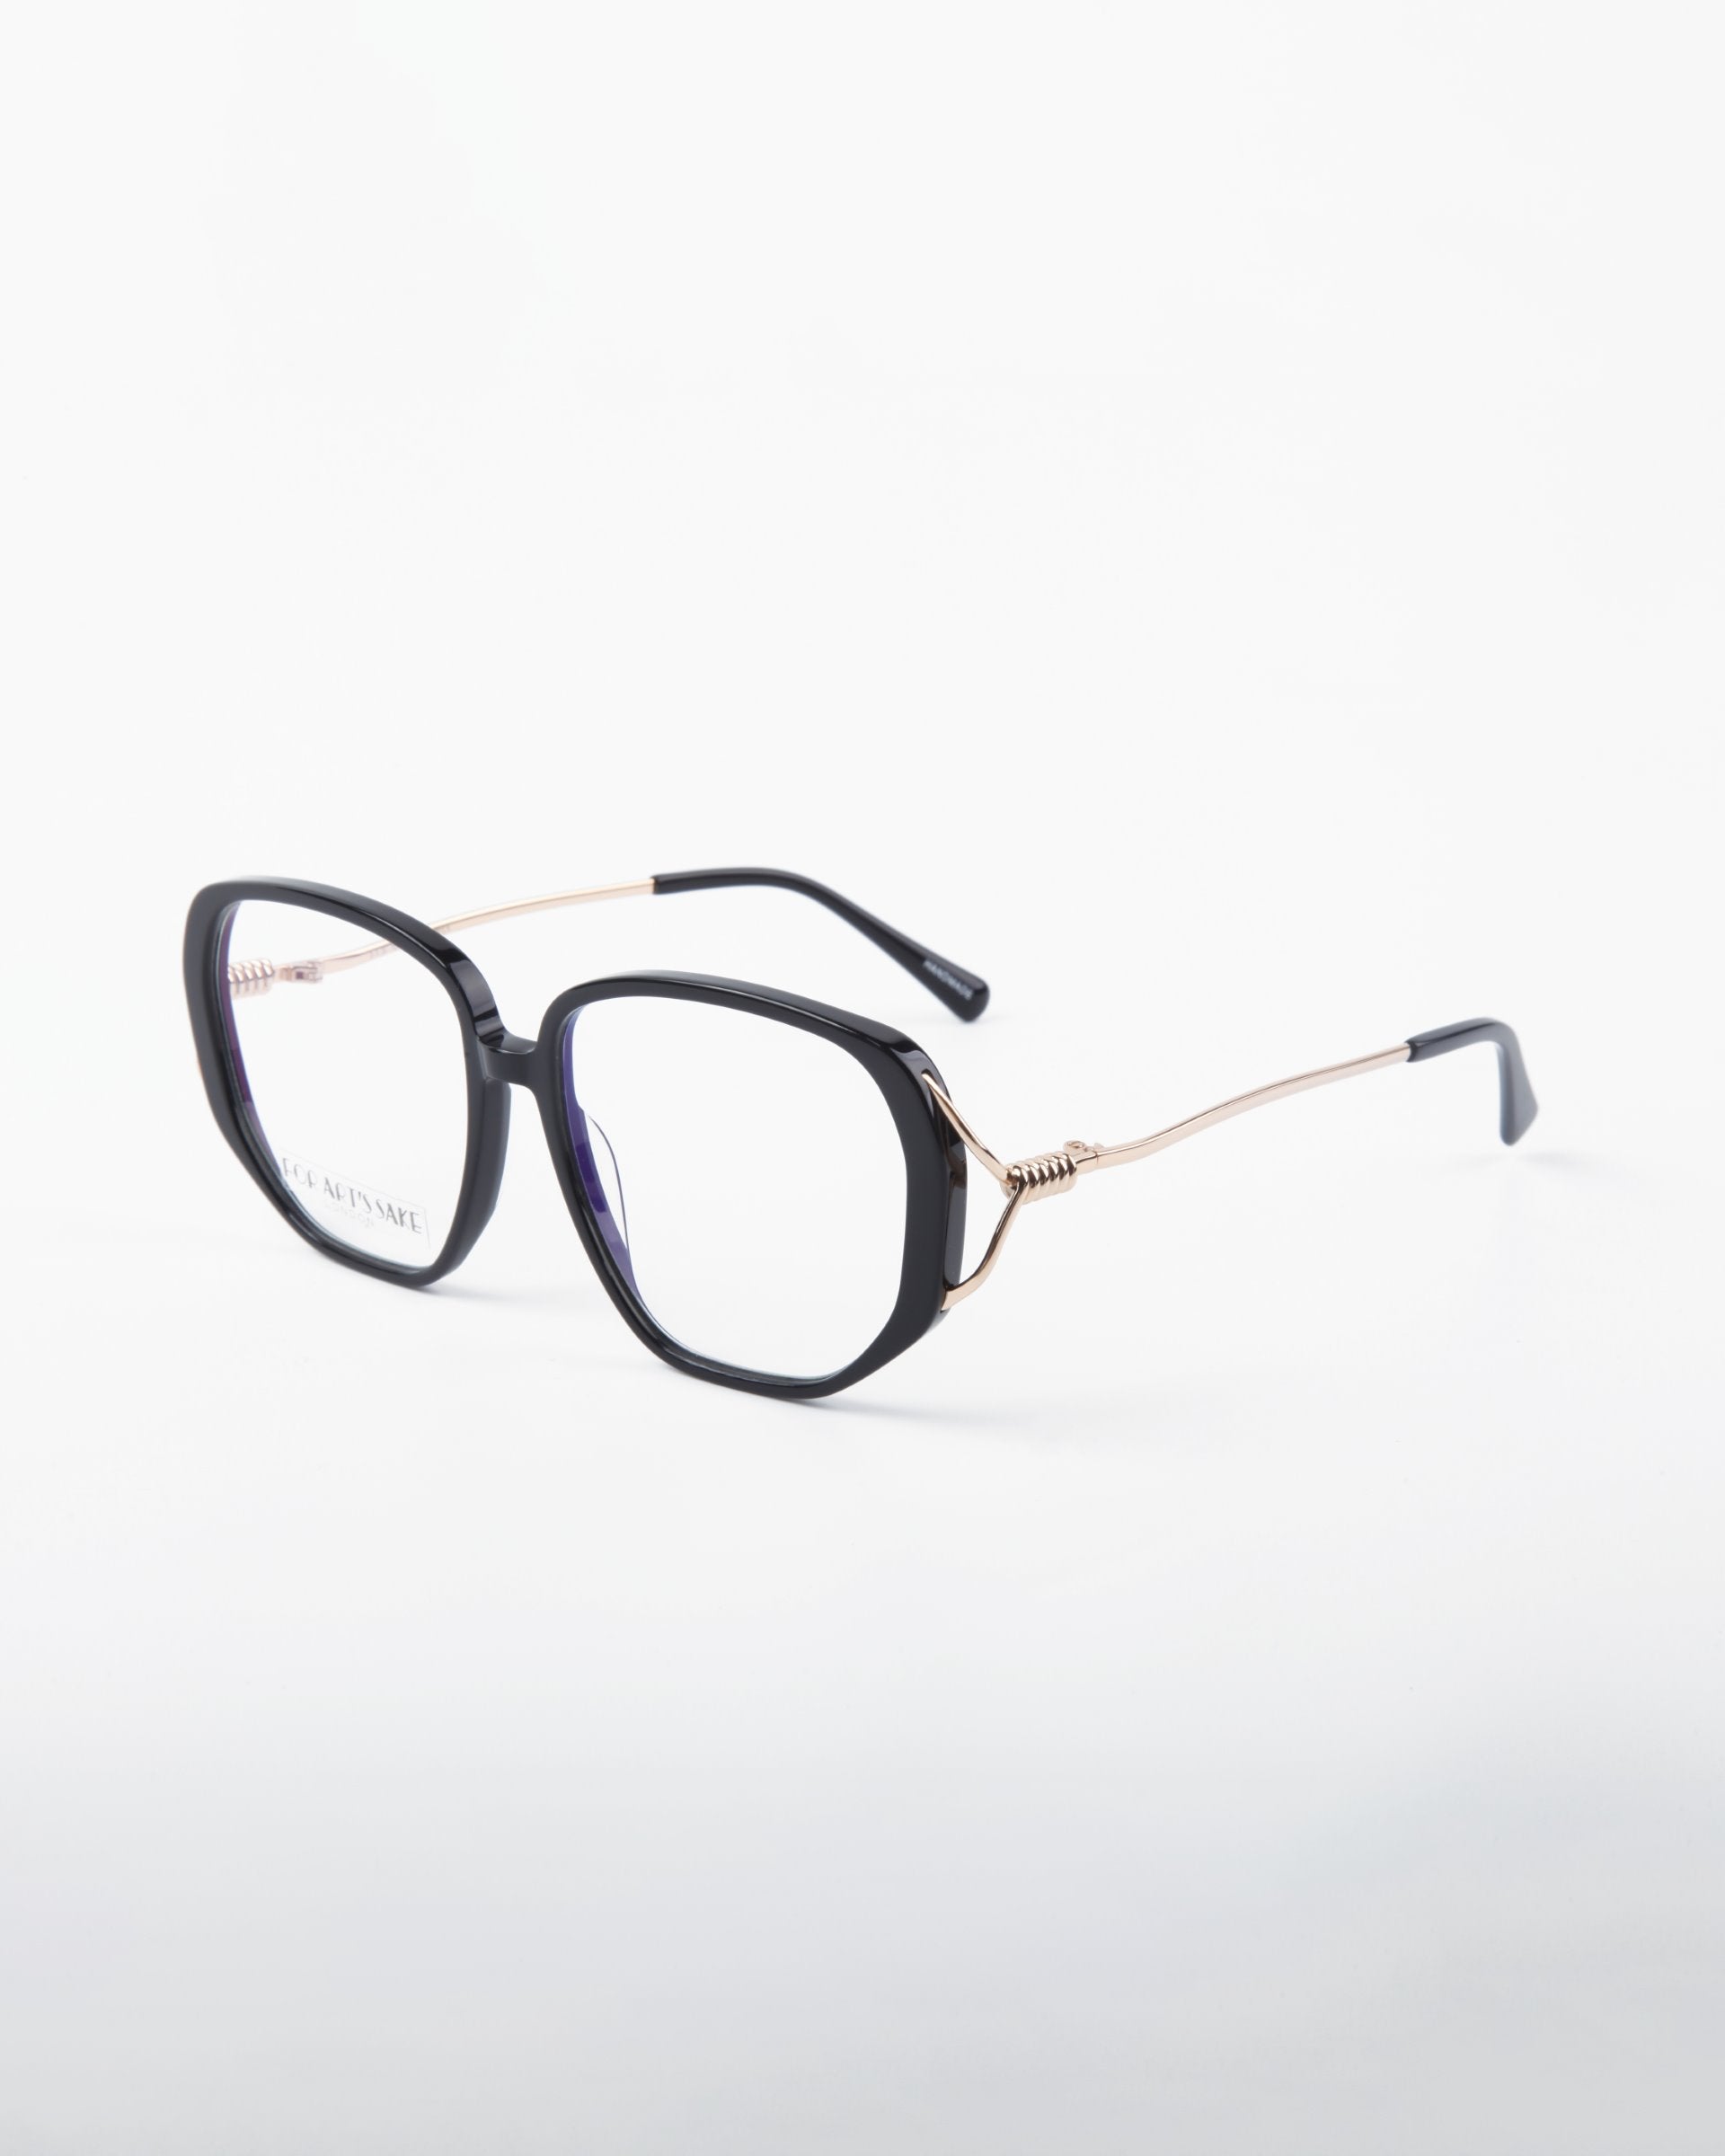 A pair of stylish For Art's Sake® Remix prescription eyeglasses with large black square frames and thin gold arms. The arms are decorated with a small coil detail near the hinges, and the glasses have transparent lenses with UV protection. The background is white.